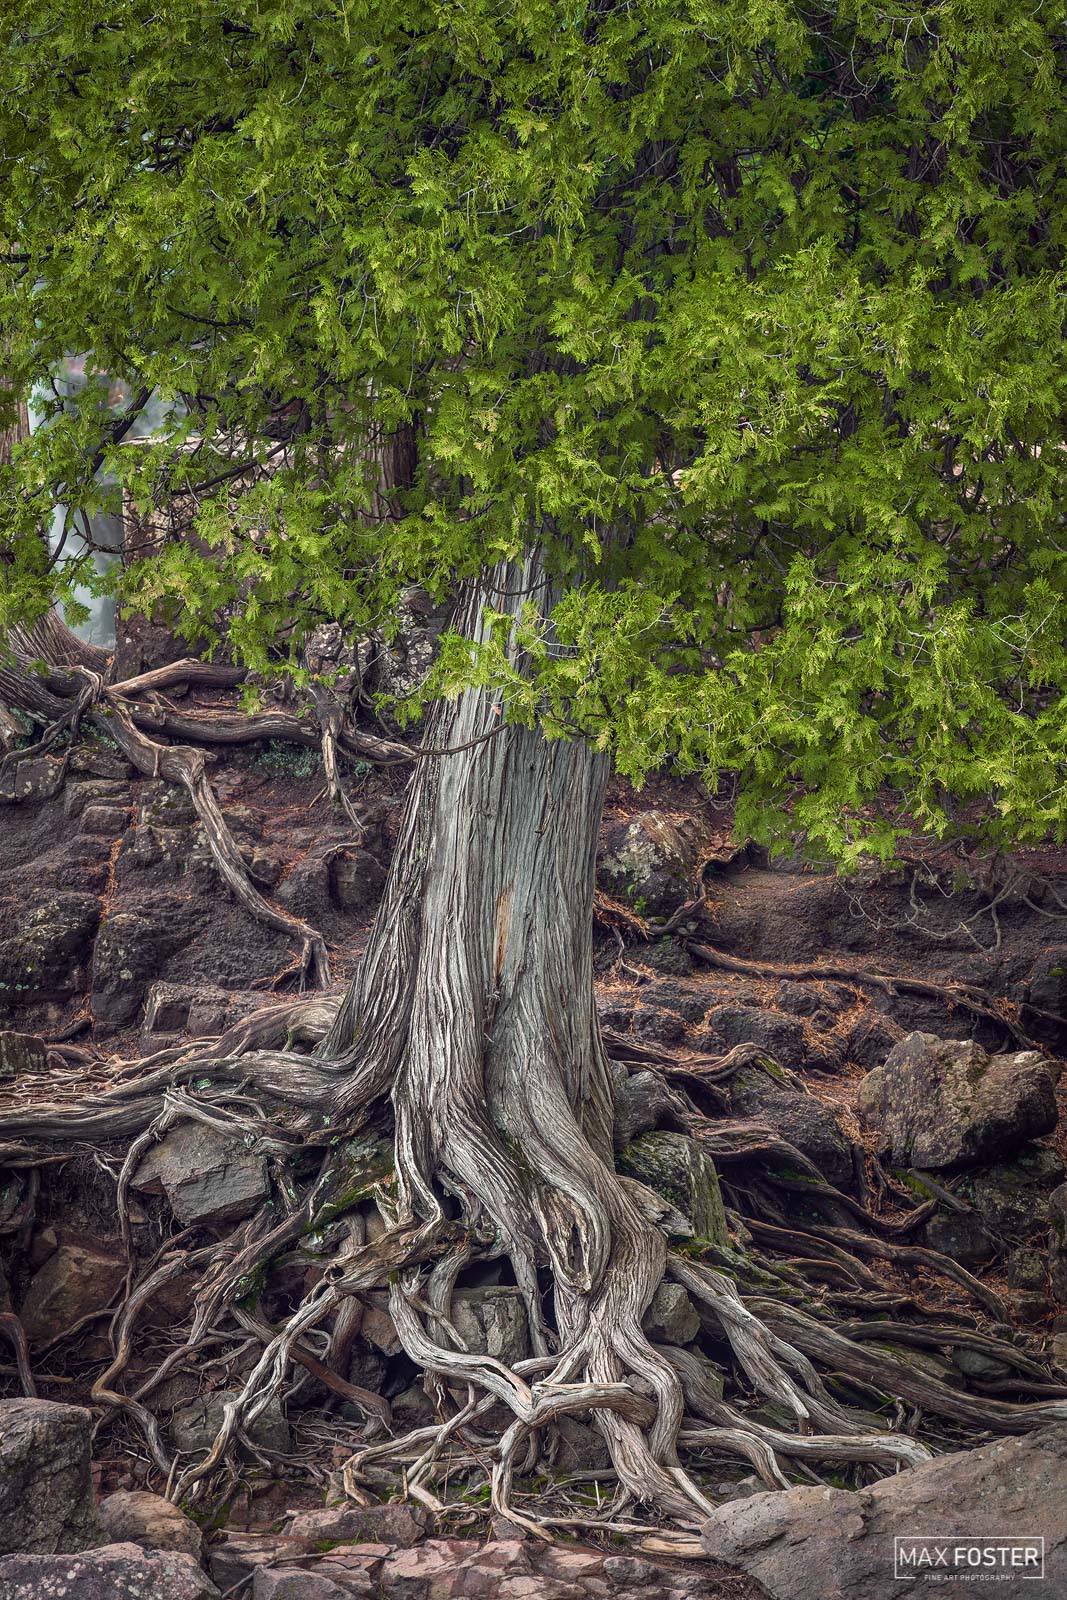 Bring nature into your home with Deep Rooted, Max Foster's limited edition photography print of an old cedar tree in Gooseberry...